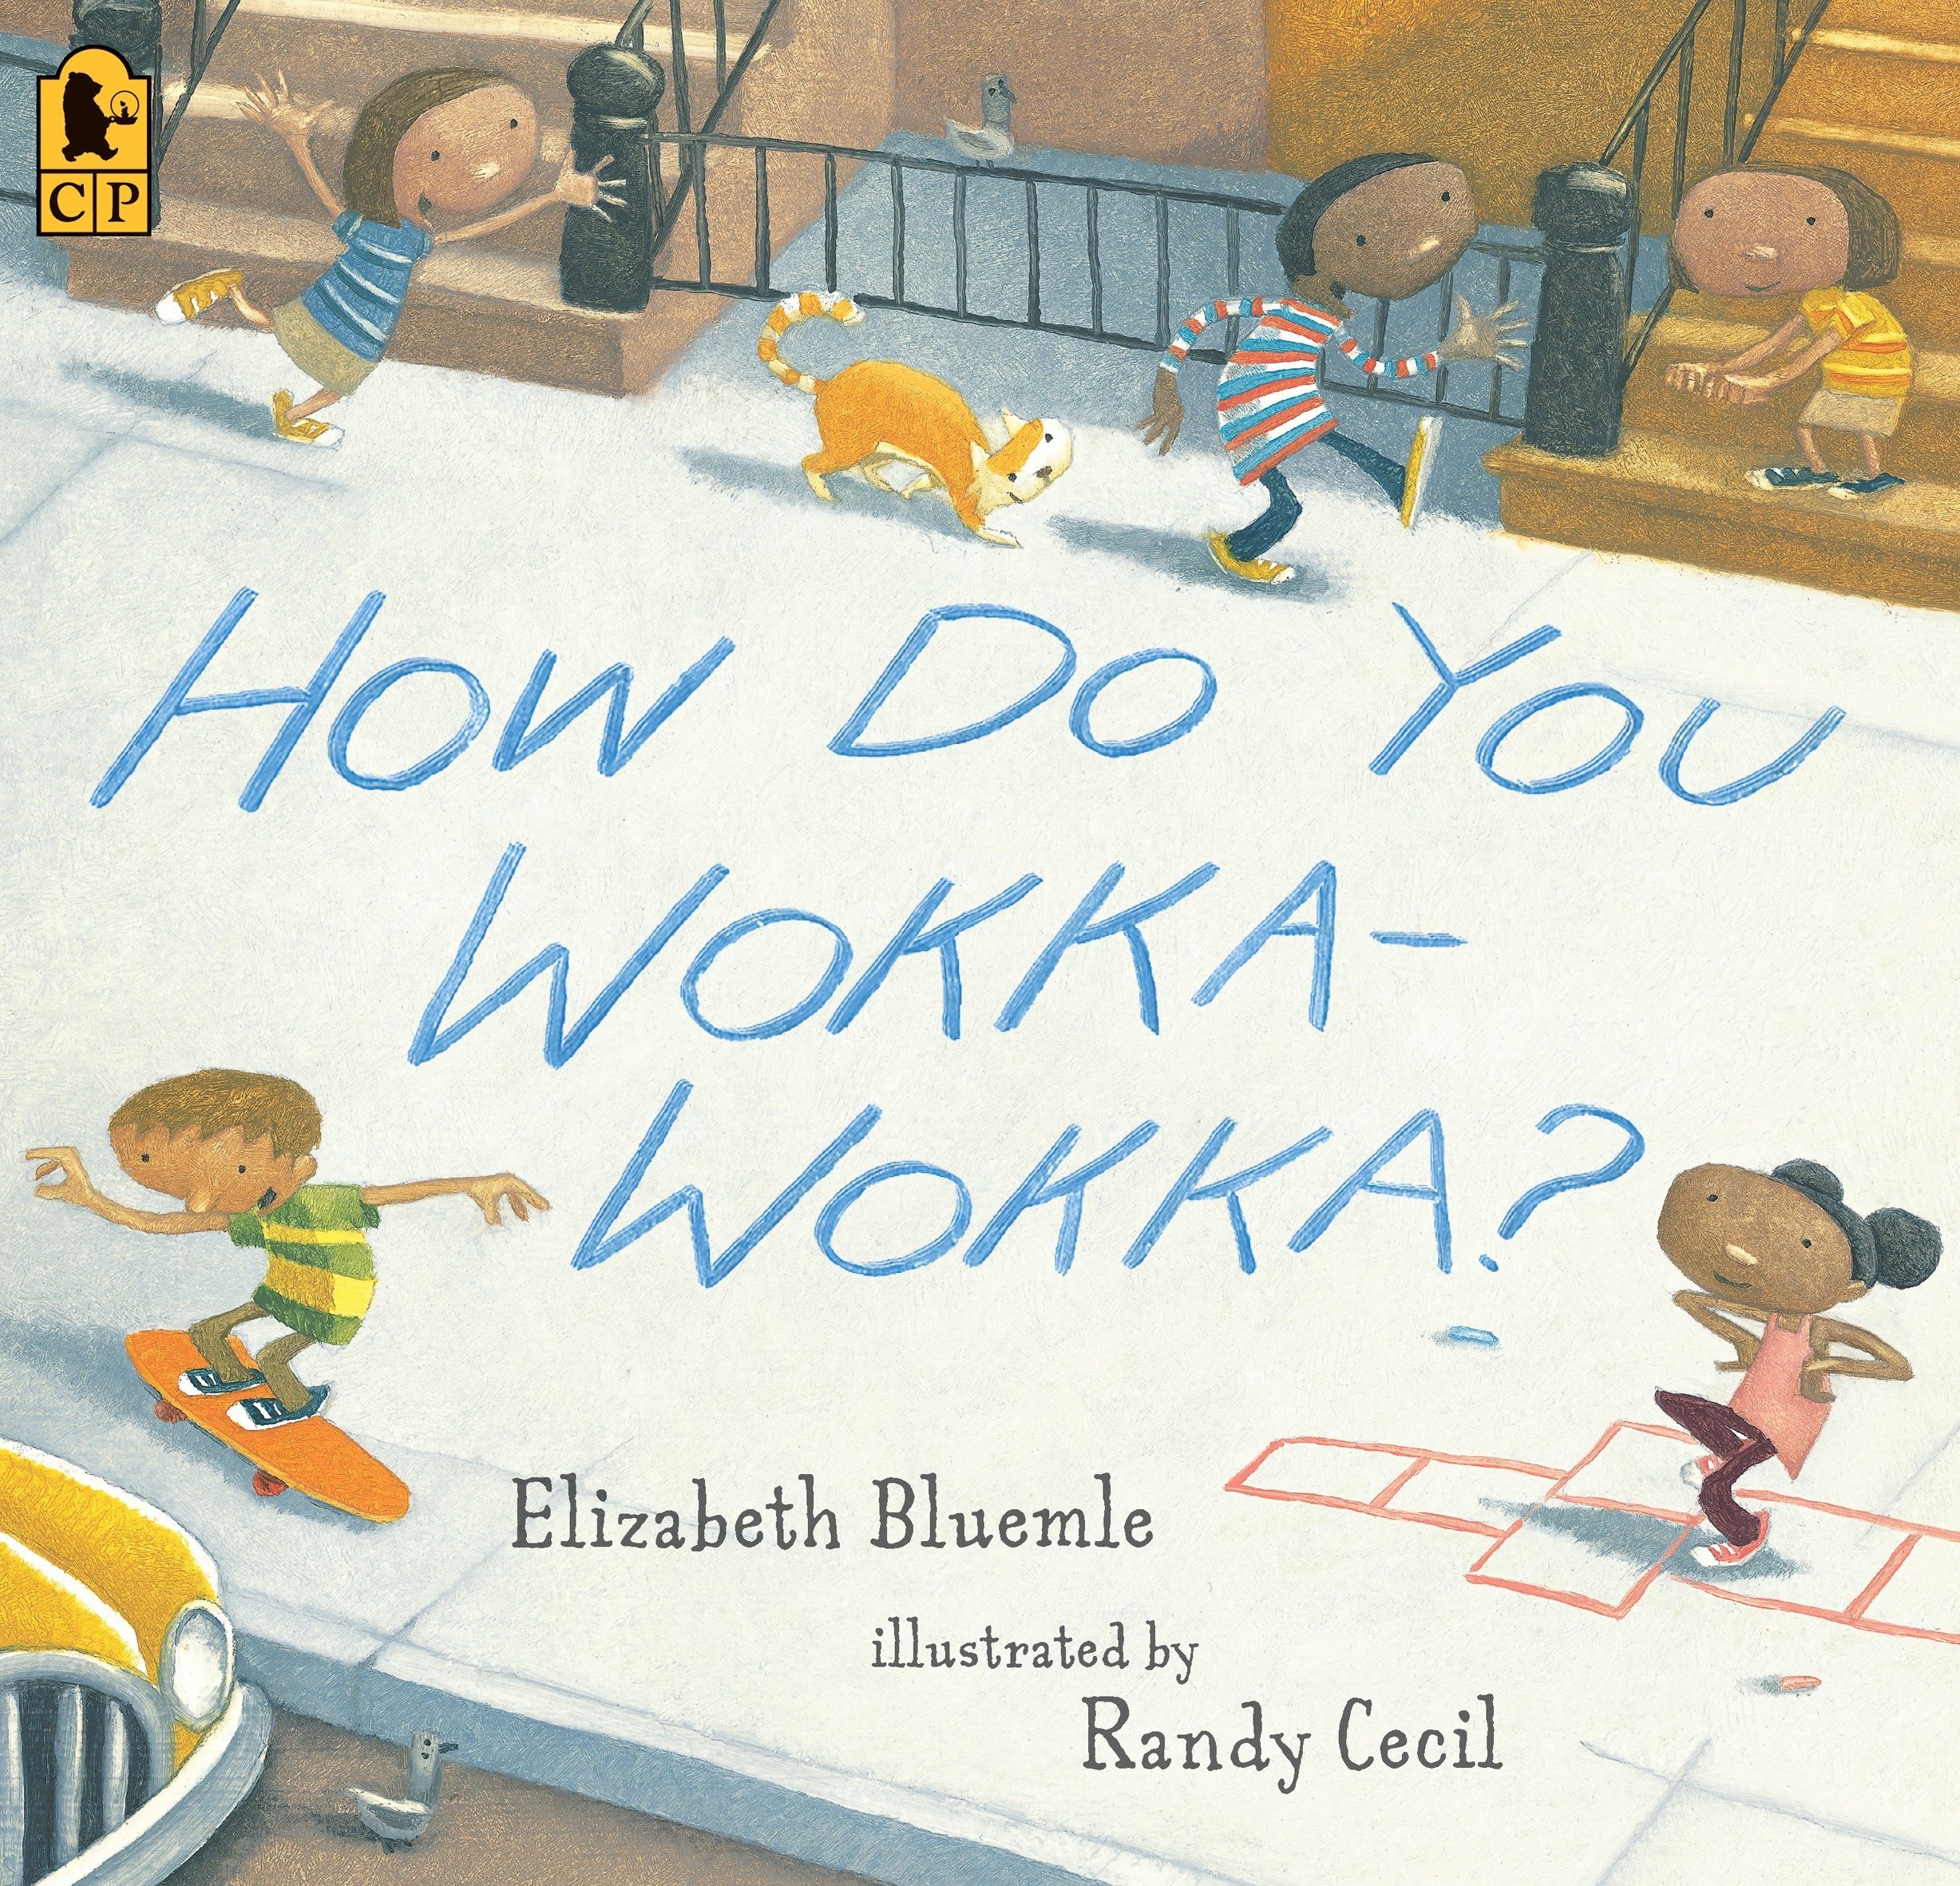 Cover of the book, How Do You Wokka-Wokka? featuring a big city sidewalk with multiracial children playing hopscotch, skateboarding and hanging out on their stoop